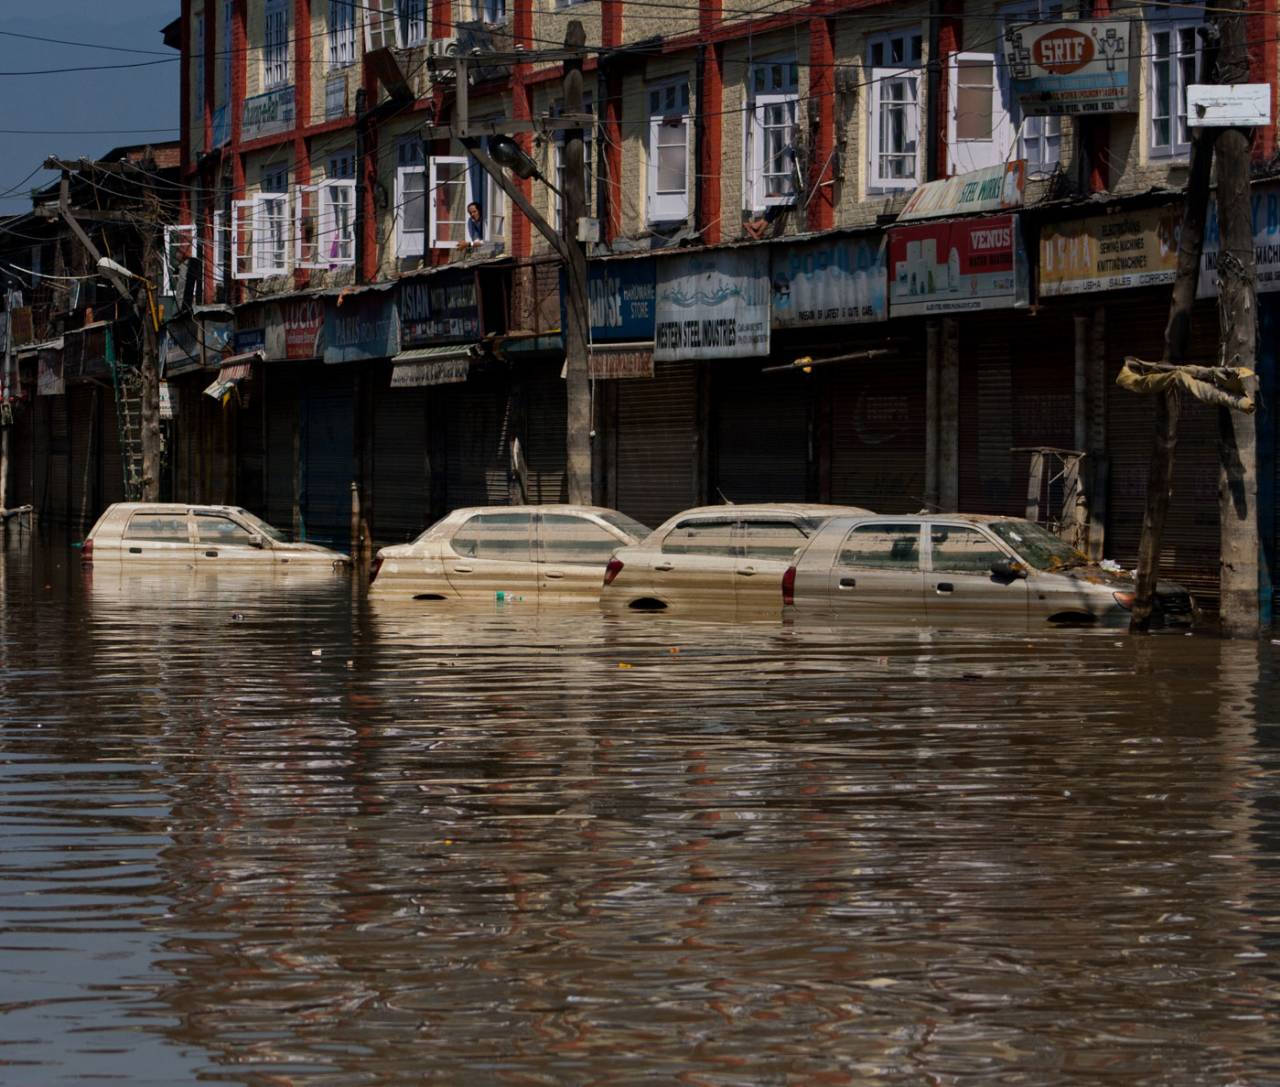 Cars sit submerged on a road in Srinagar's flooded city centre, September 17, 2014